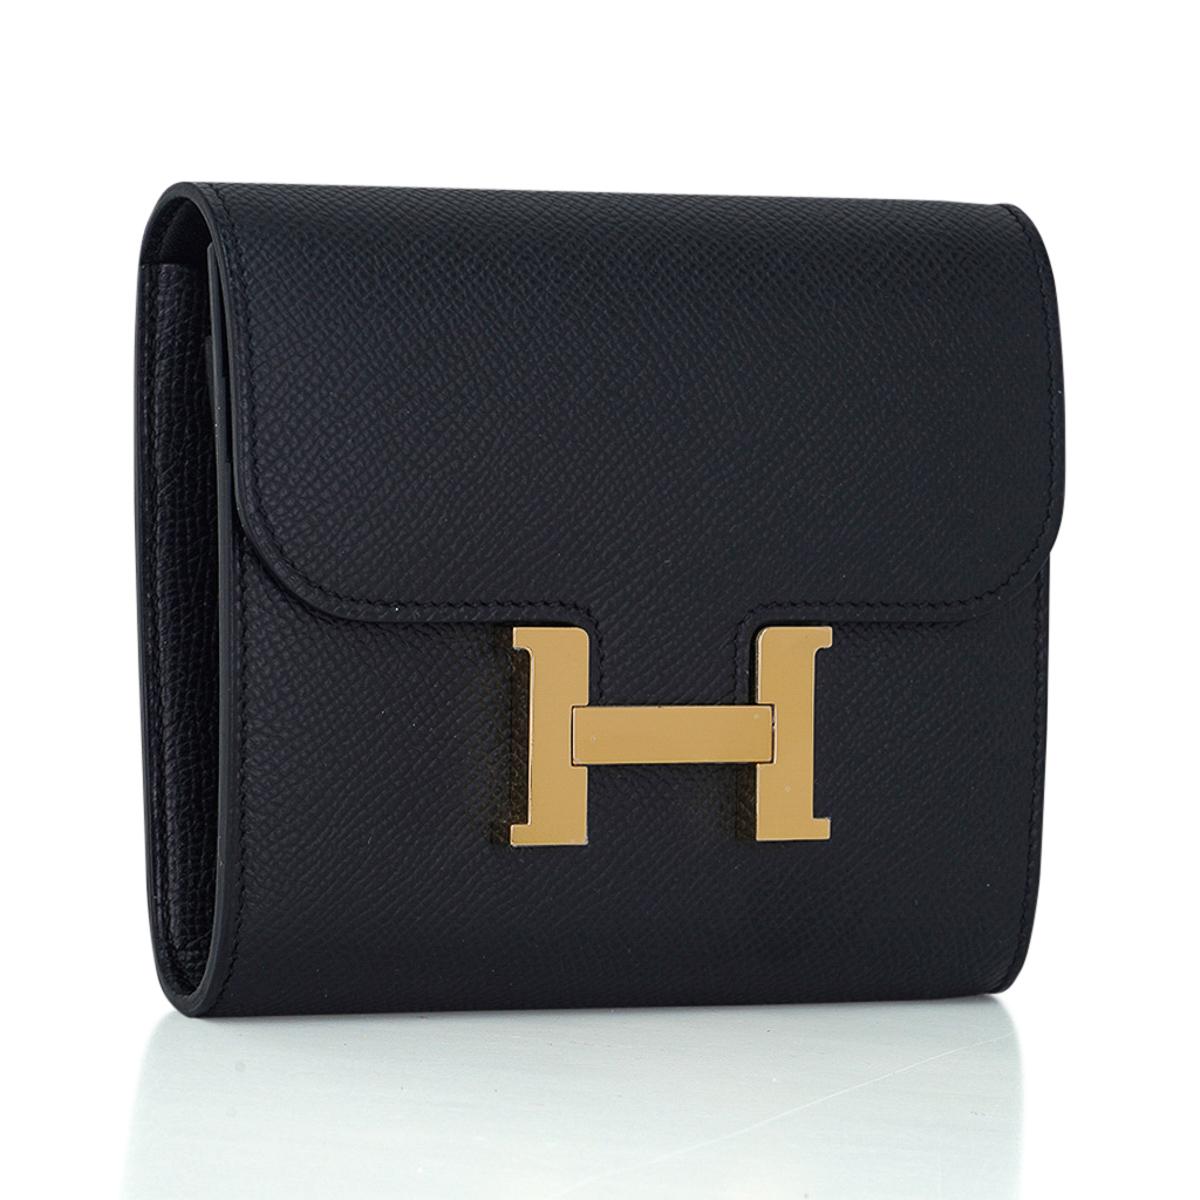 Mightychic offers an Hermes Constance Compact Wallet featured in Noir.
This classic wallet features 4 credit card slots, 1 zip compartment and 1 rear slot.
Epsom leather has fine grain and saturates colour to its richest hue.
Rich with Gold